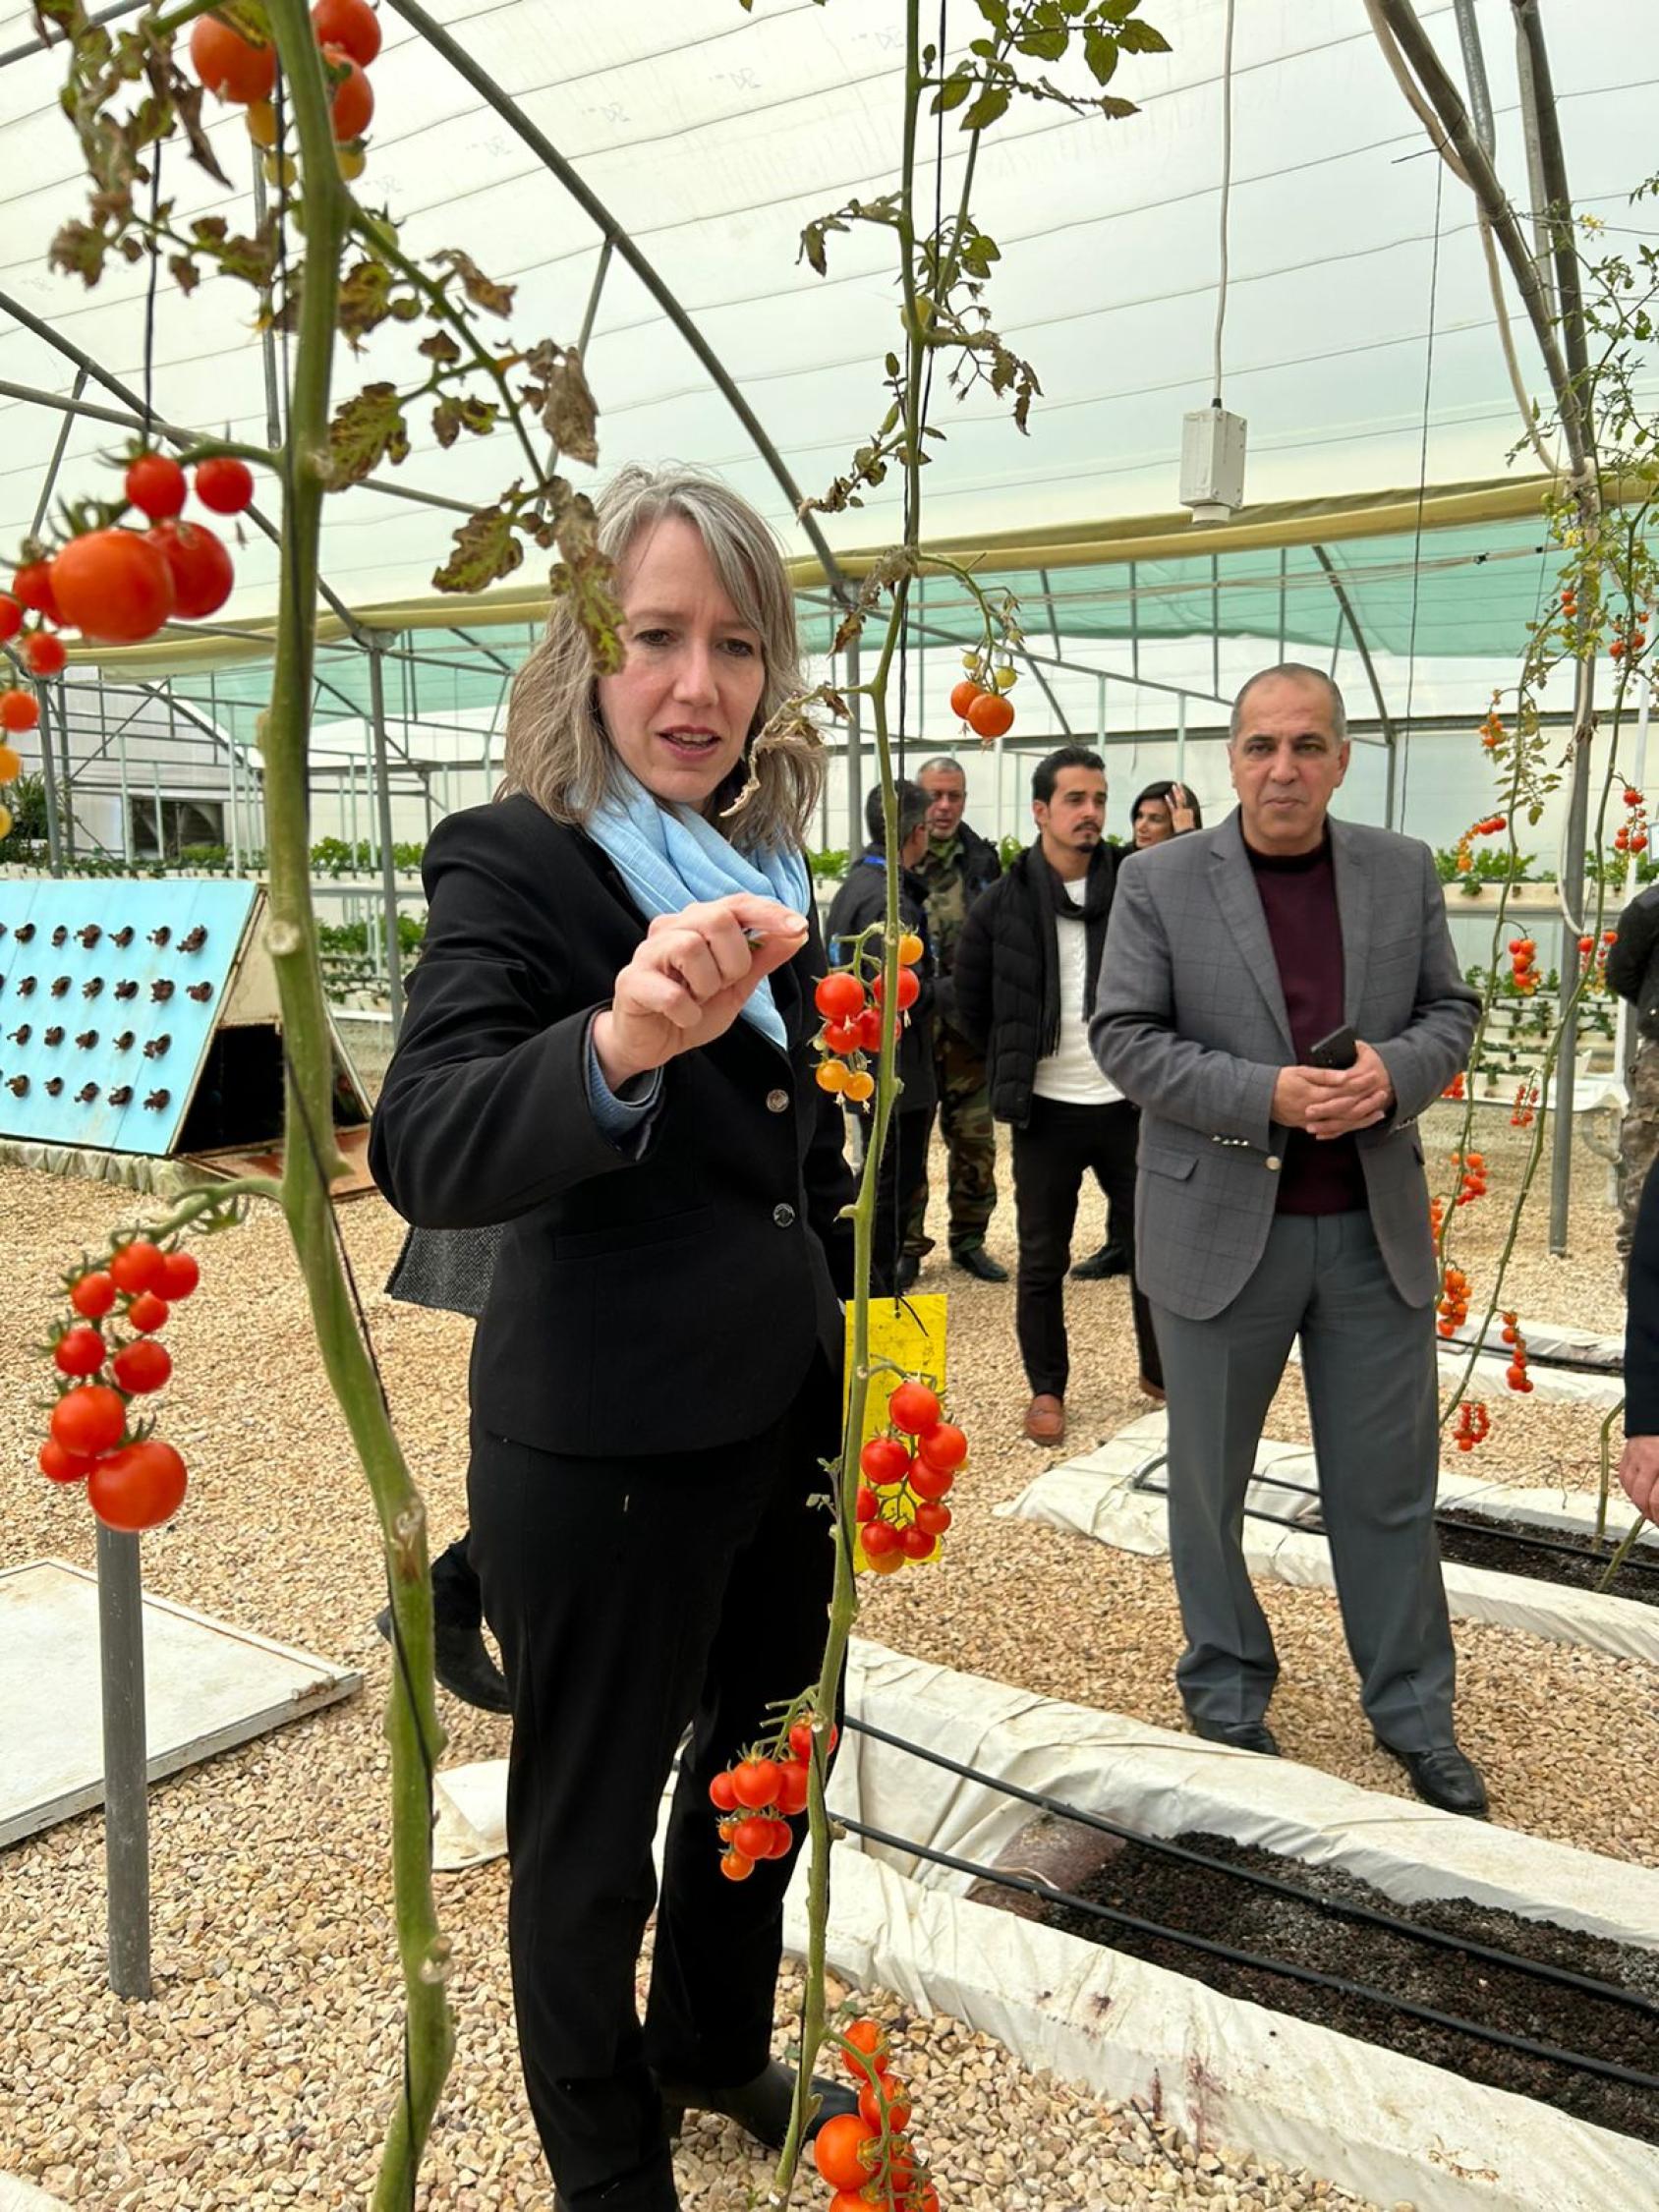 Woman in a black suit looking at tomato vines in a small farm